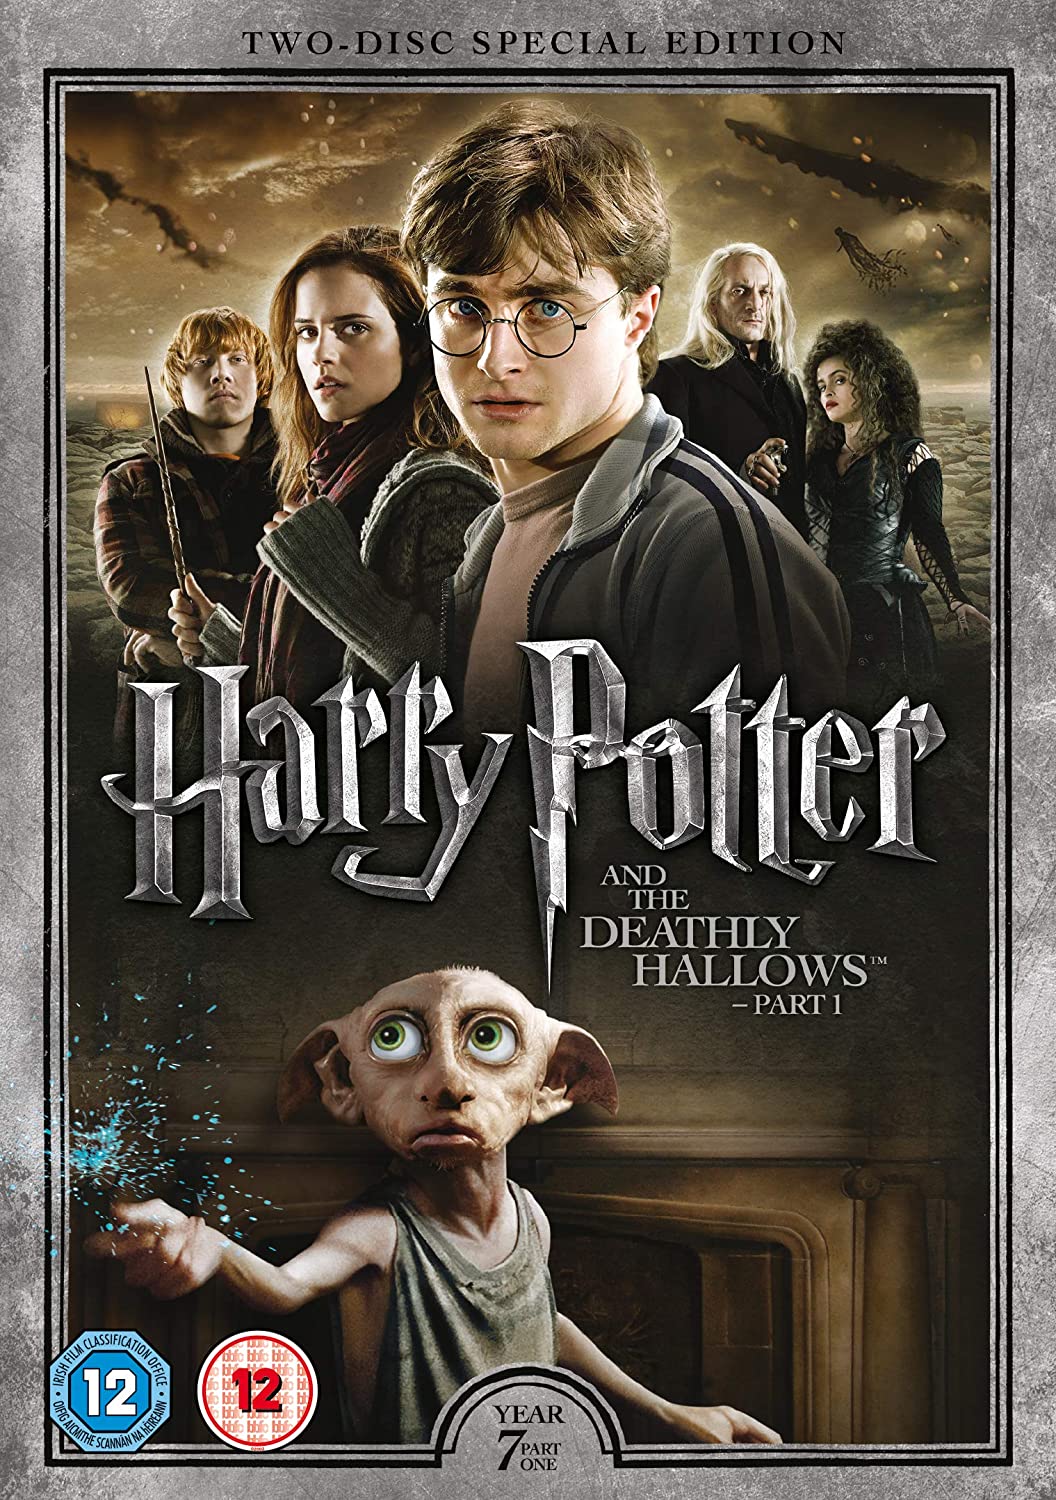 Harry Potter and the Deathly Hallows - Part 1 [Year 7] [2016 Edition 2 Disk]  [2010] - Fantasy/Family [DVD]